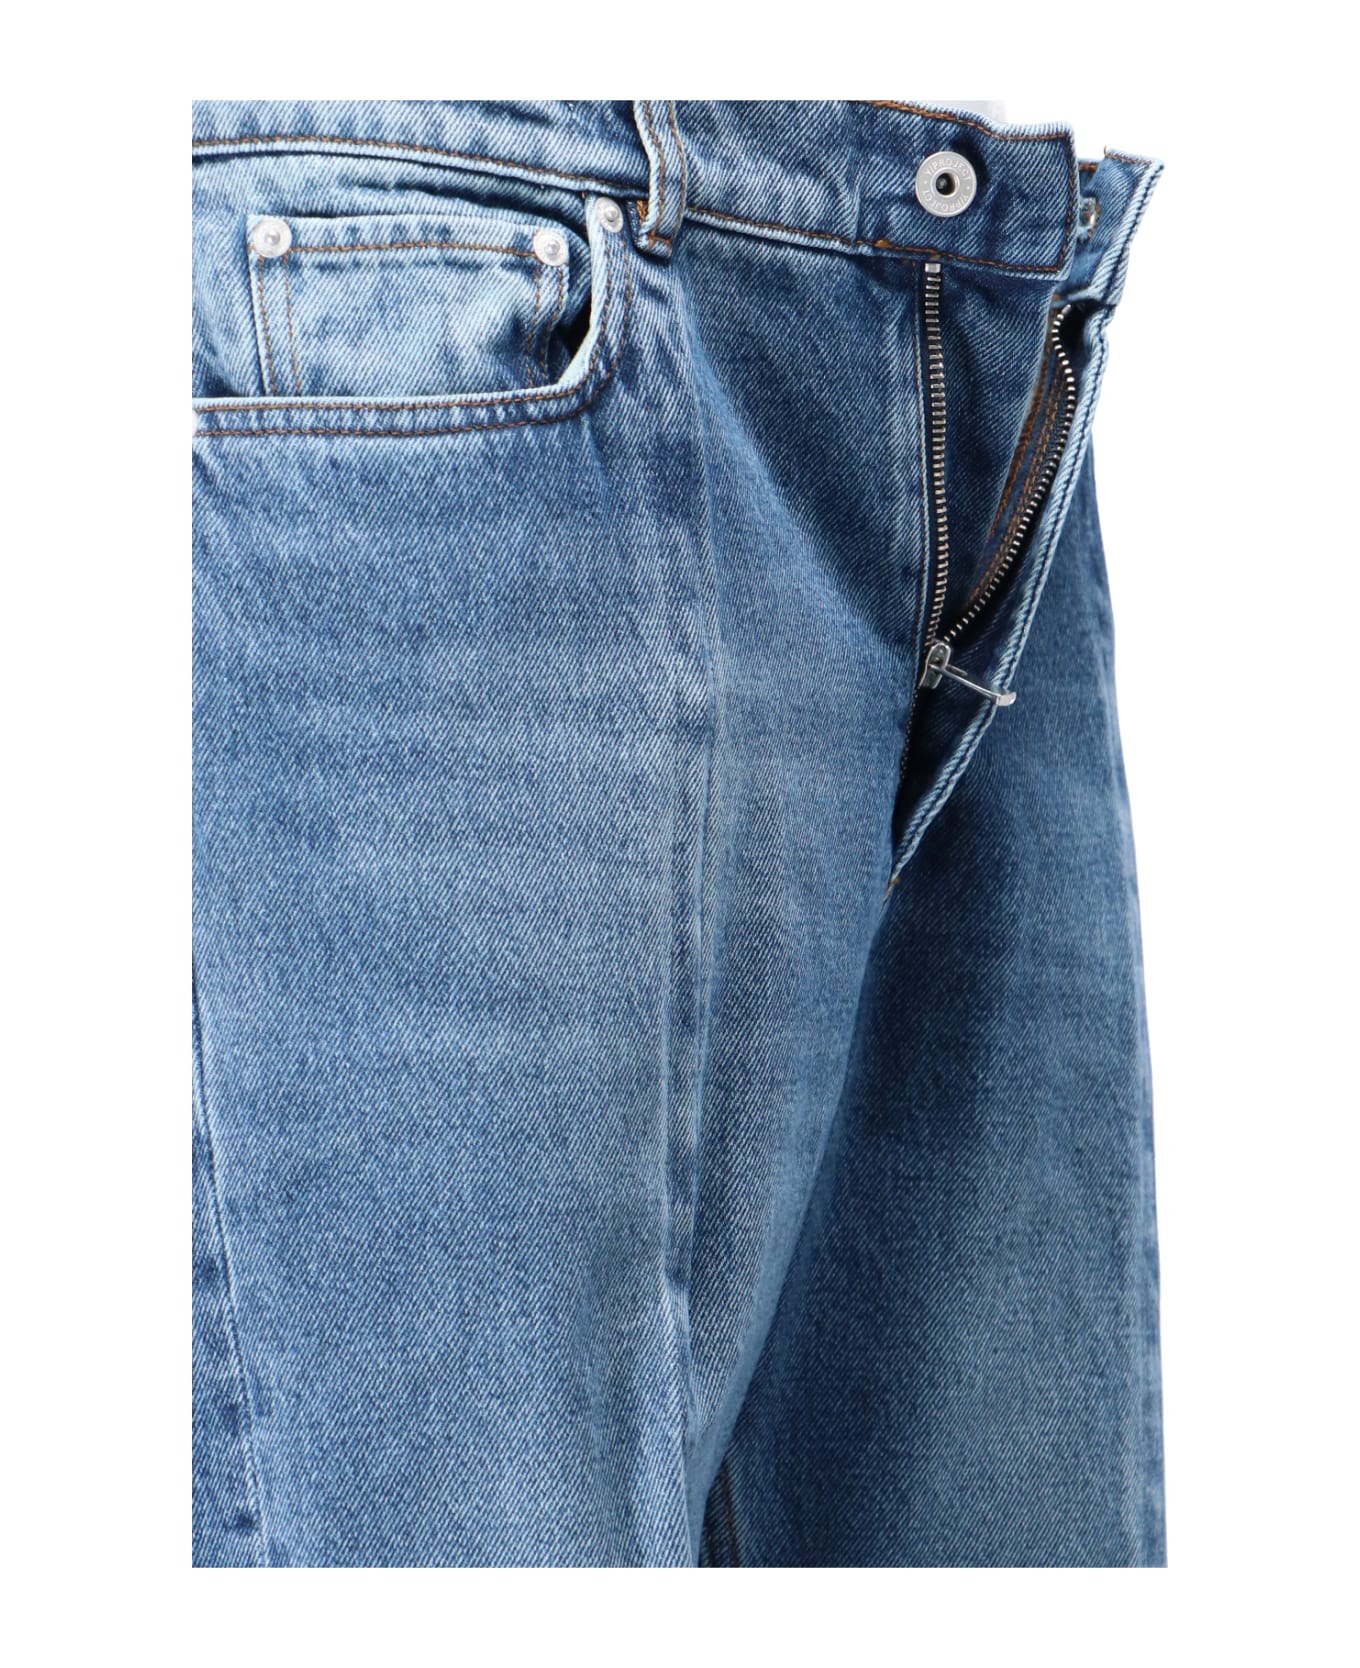 Y/Project "evergreen" Jeans - Blue デニム